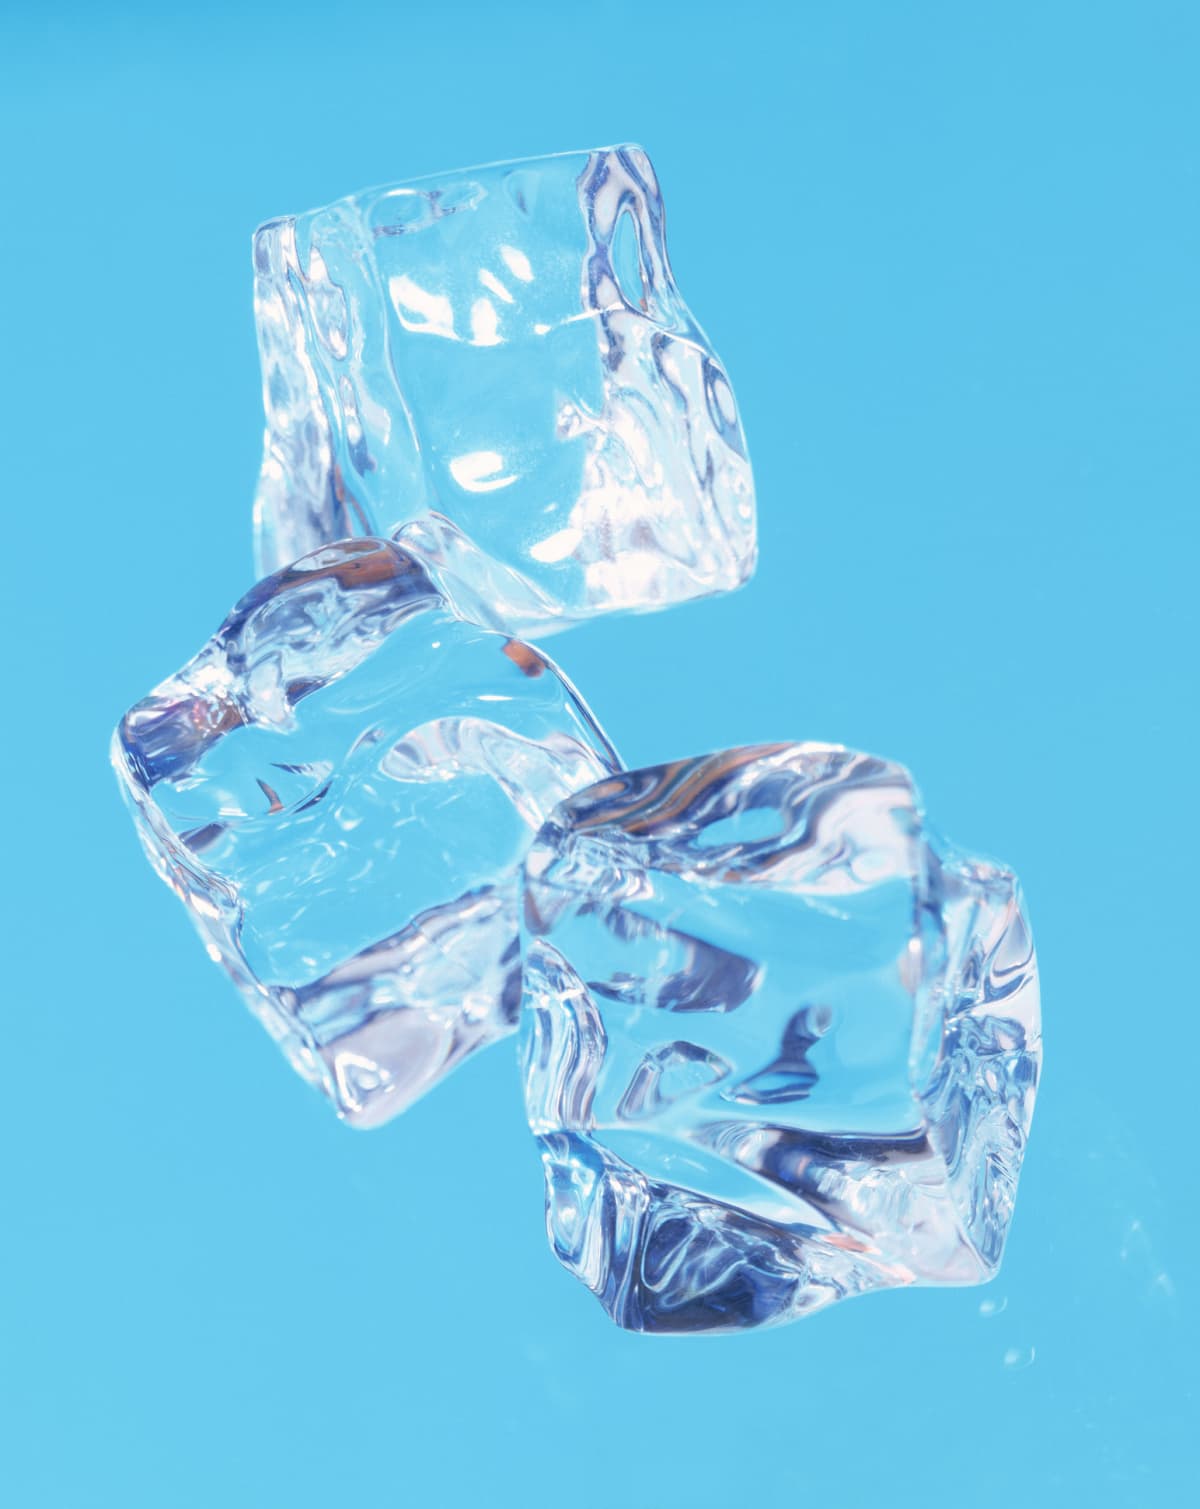 Falling ice cubes on a blue background